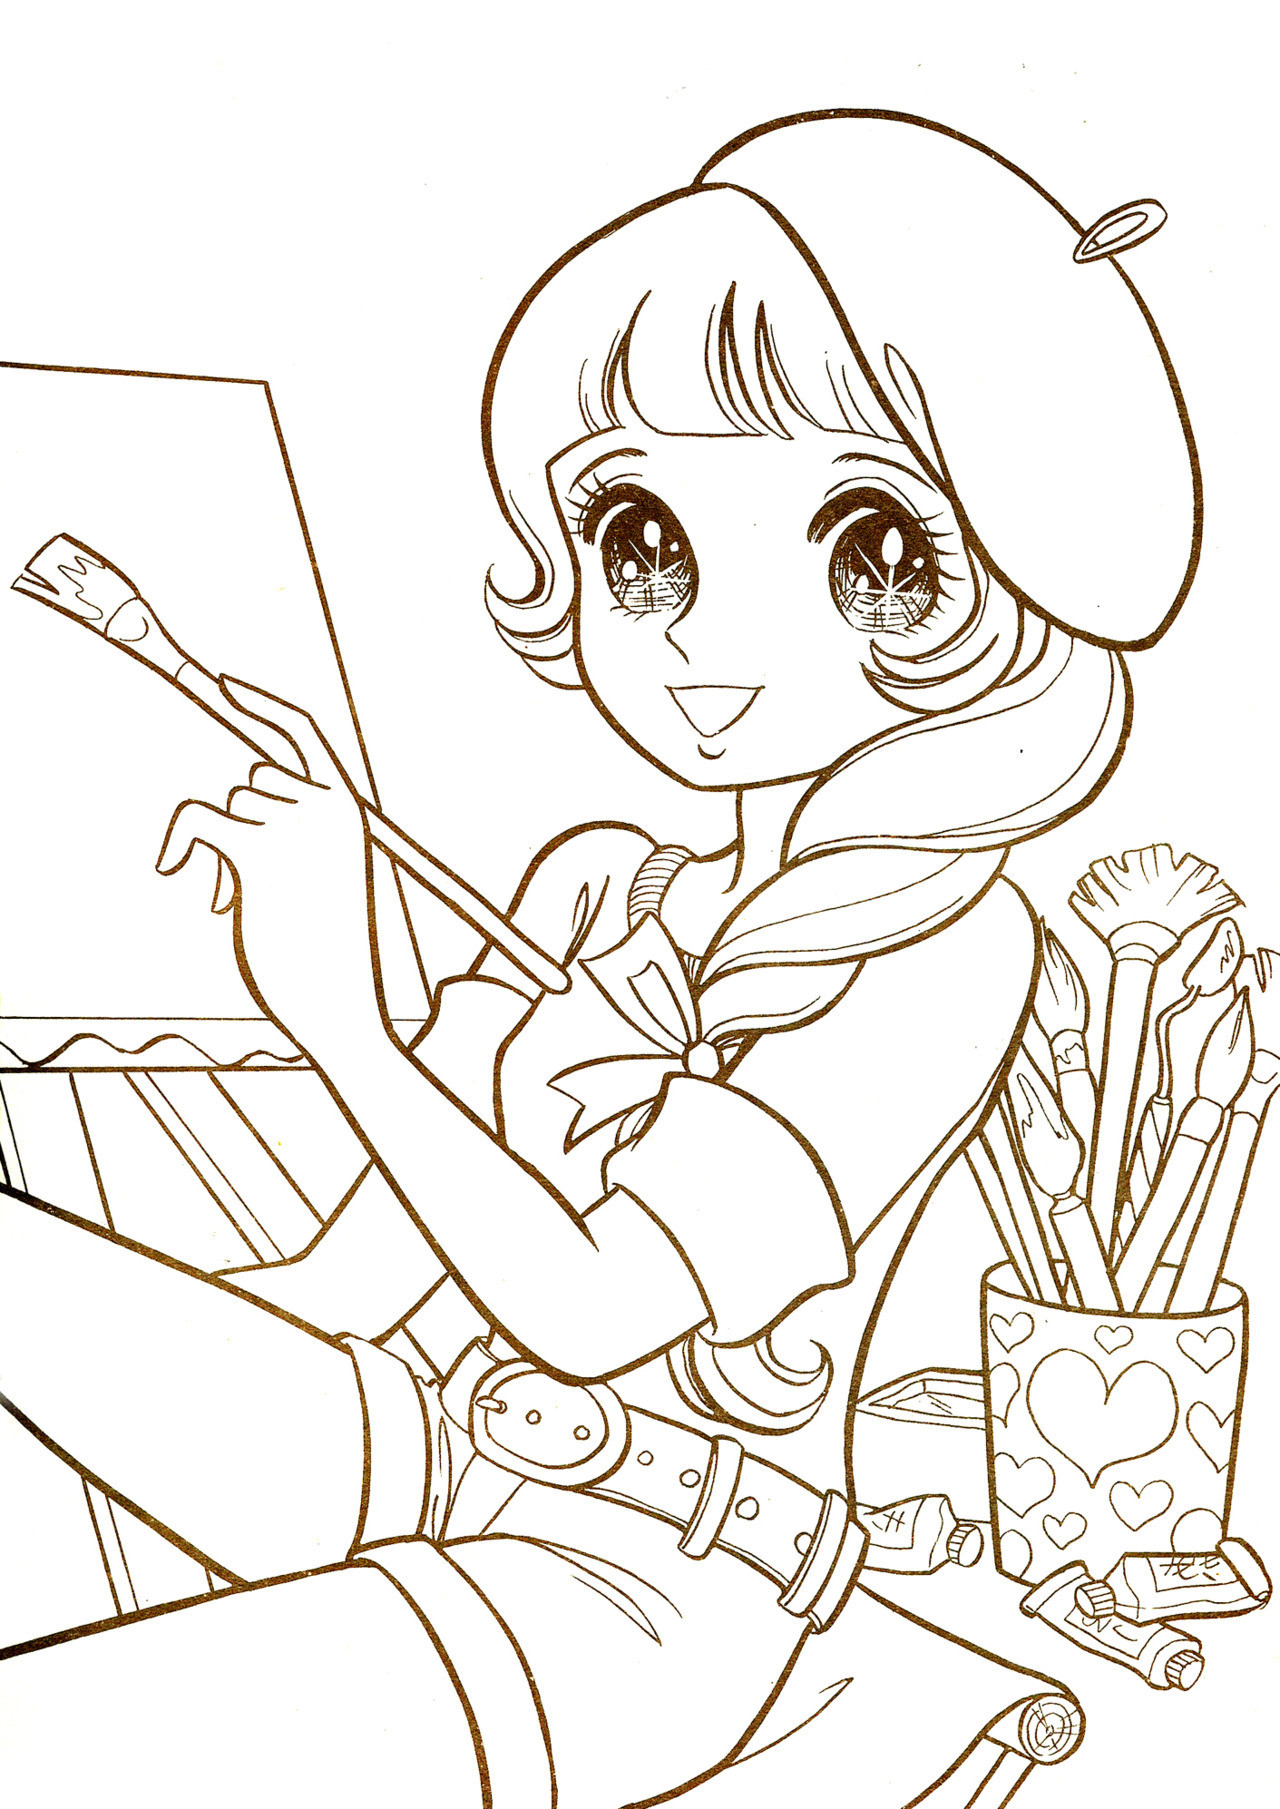 Coloring Pages Of Anime Girls
 Devianart Dolls Kawaii on Pinterest